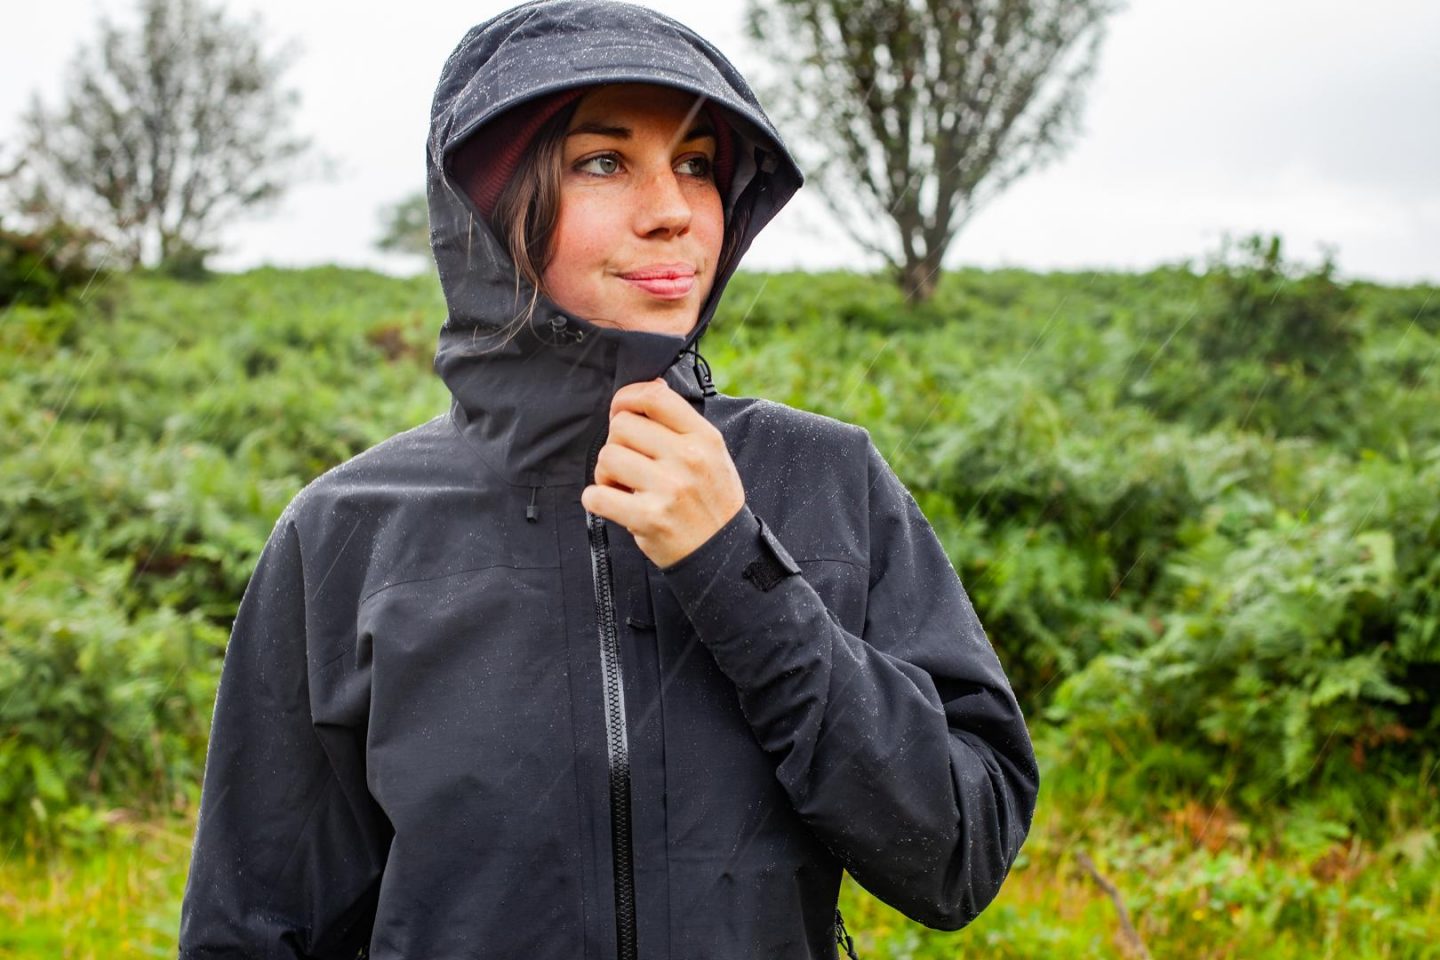 How to look after outdoor kit: cleaning, maintenance and repair for waterproof jackets Sian Lewis The Girl Outdoors